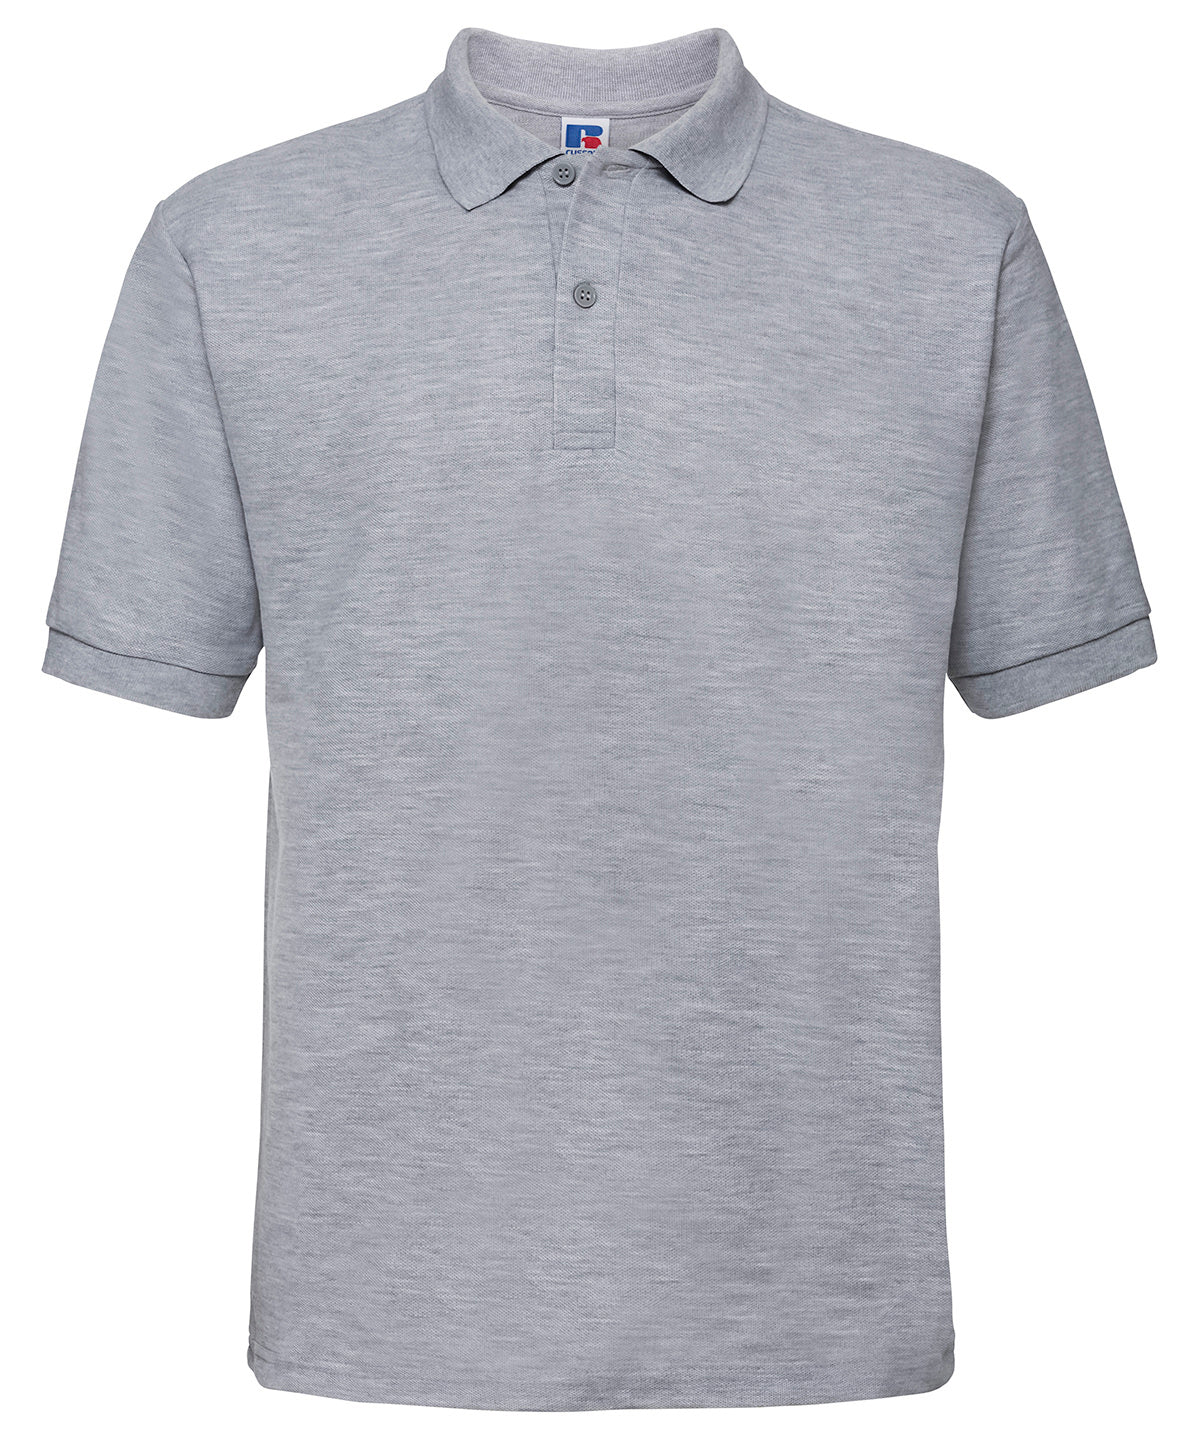 Russell Classic Polycotton Polo Light Oxford